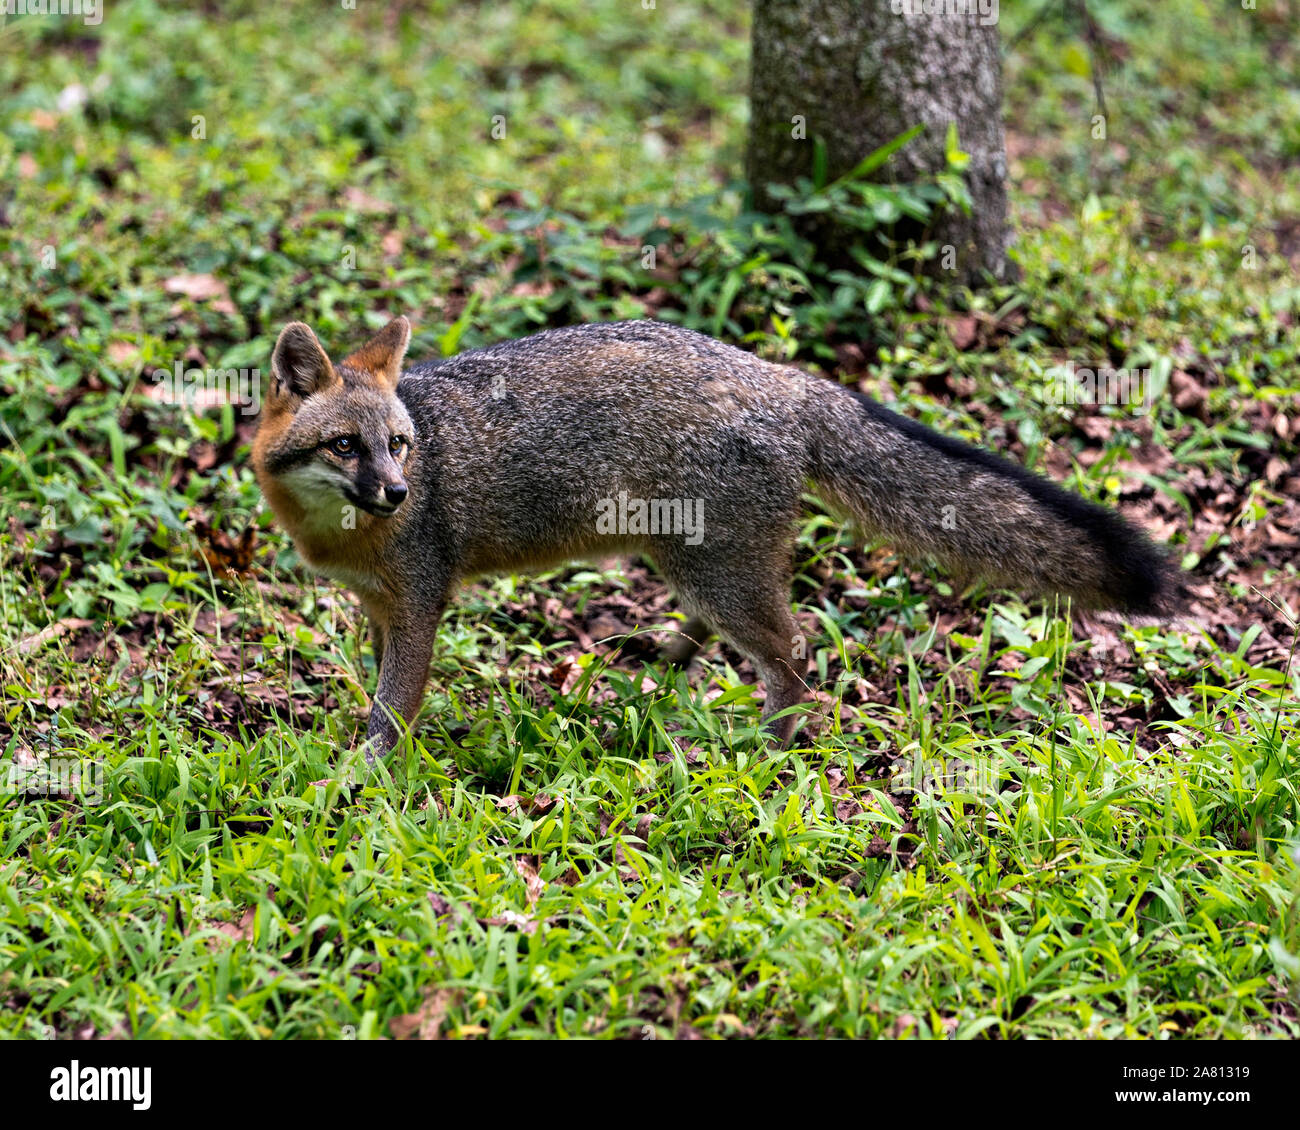 Grey fox walking in a field, exposing its body, head, ears, eyes, nose, tail enjoying its surrounding and environment. Stock Photo